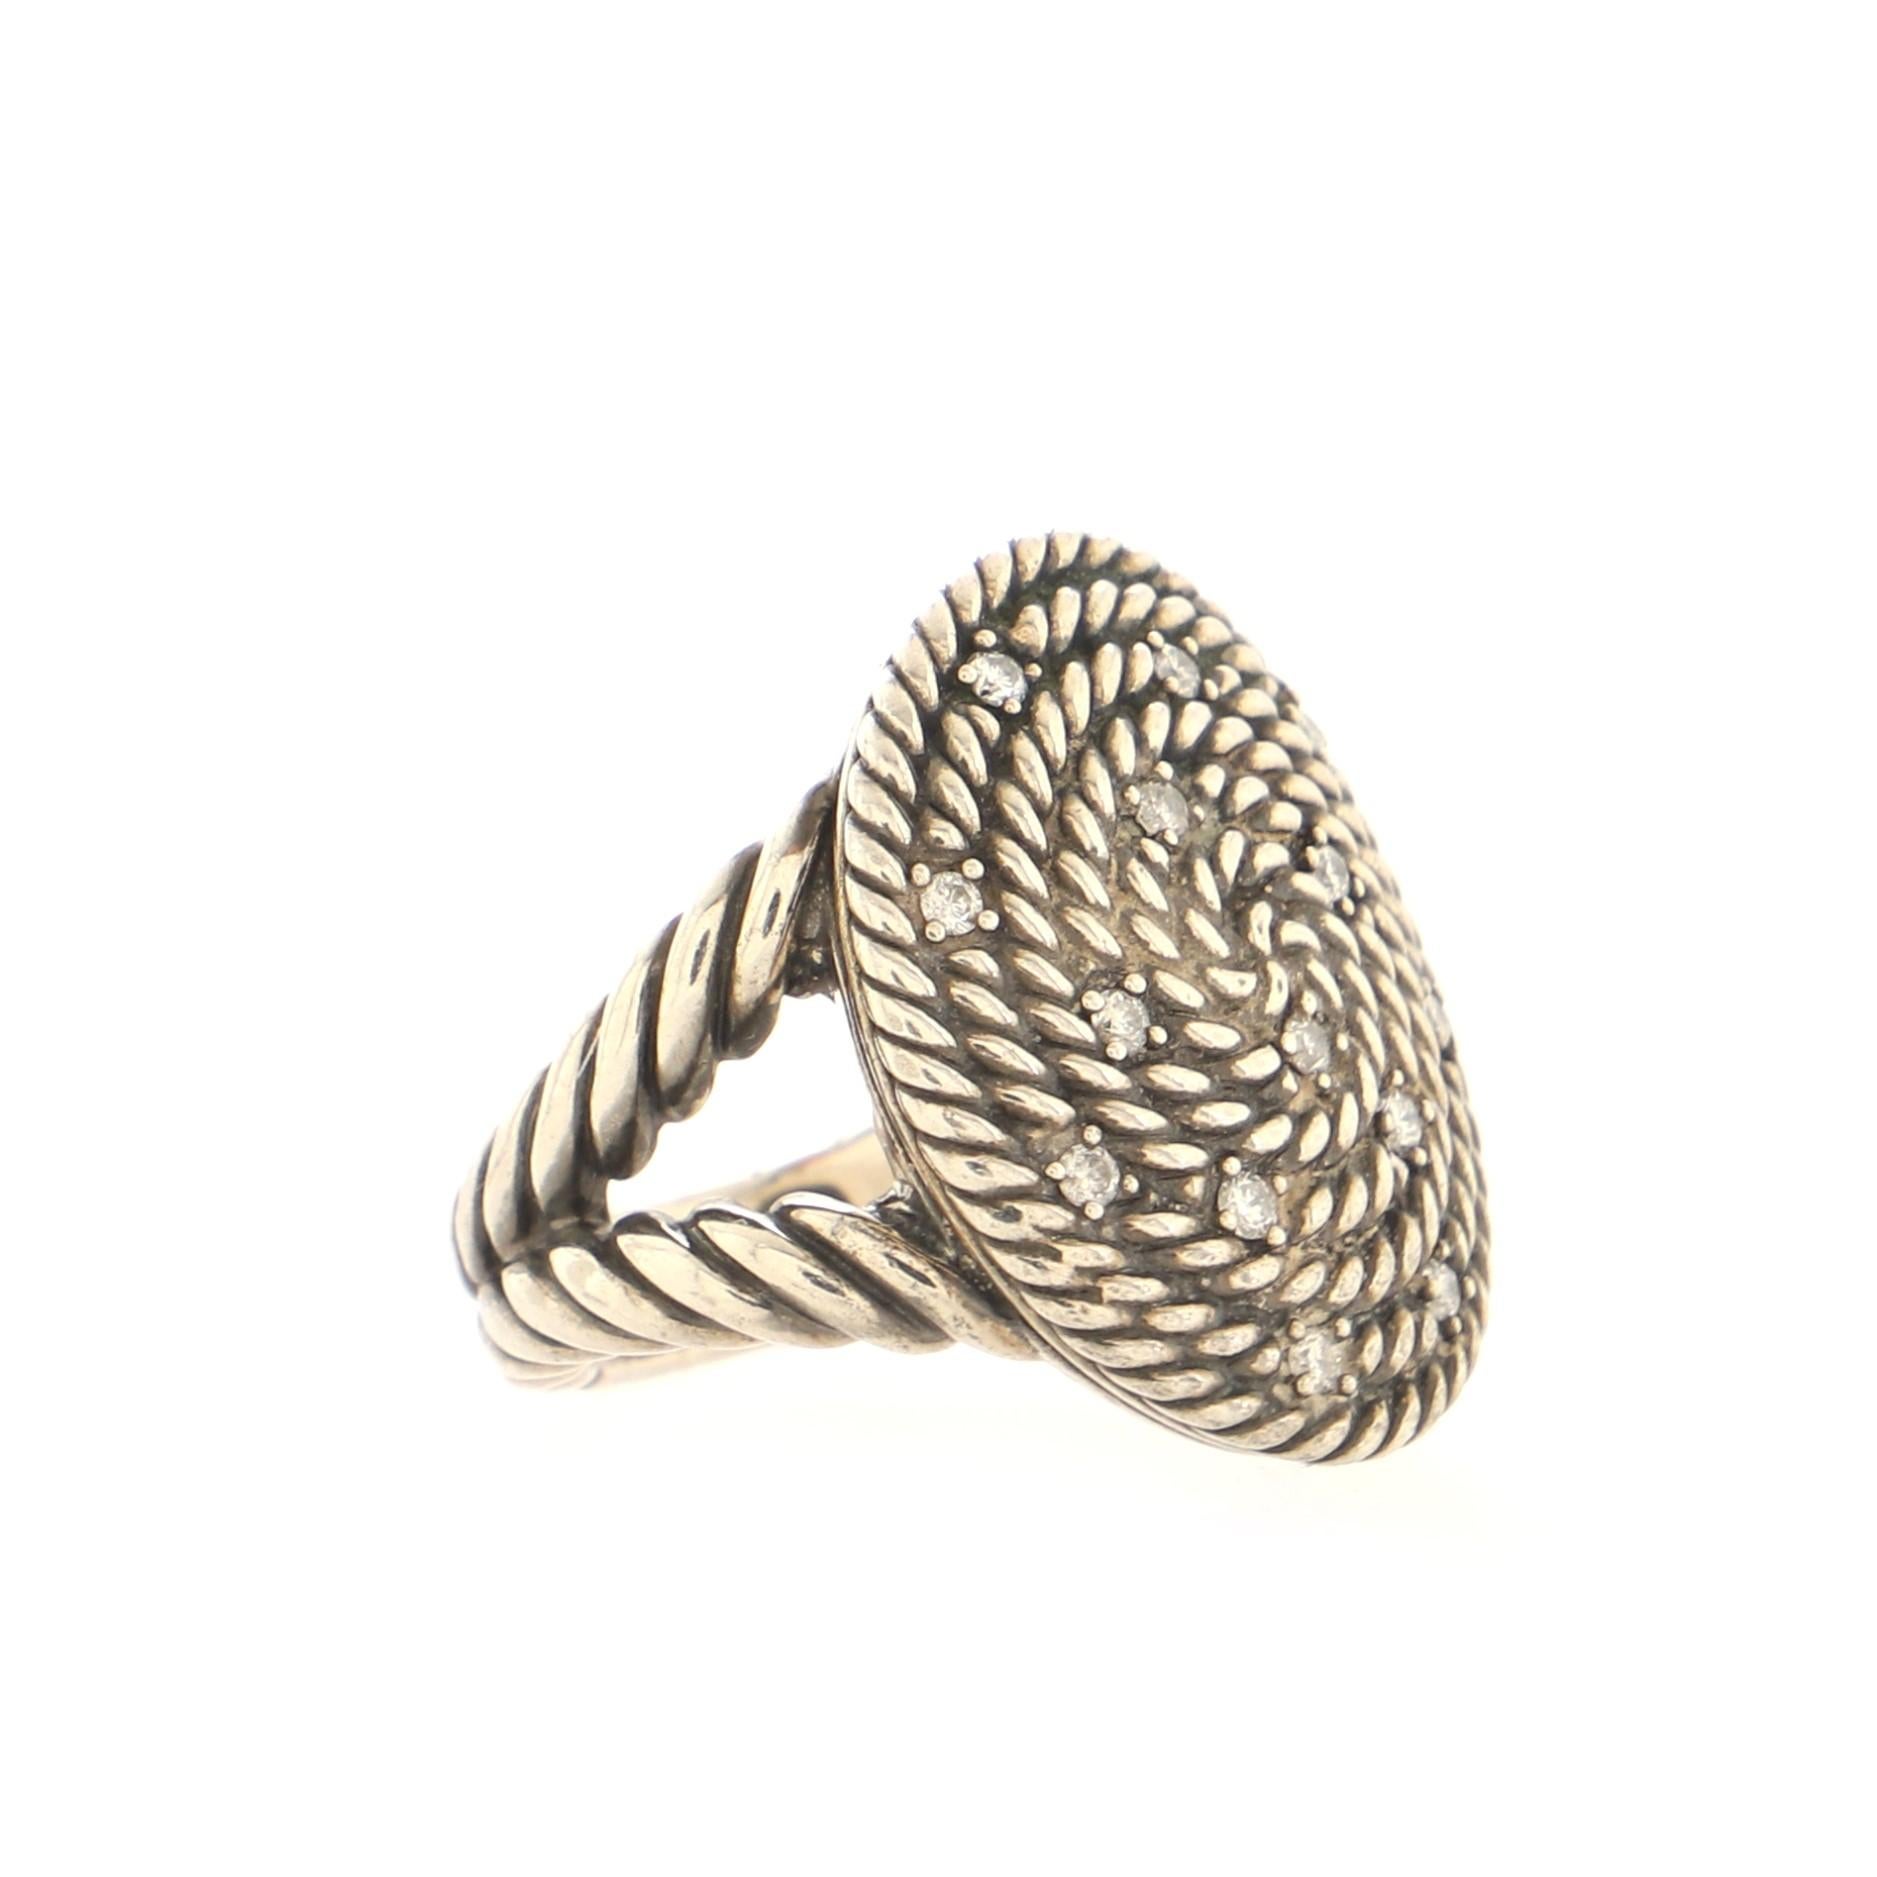 Condition: Good. Moderately heavy wear throughout.
Accessories: No Accessories
Measurements: Size: 5, Width: 4.50 mm
Designer: David Yurman
Model: Cable Coil Oval Ring Sterling Silver with Diamonds
Exterior Color: Silver
Item Number: 178676/1